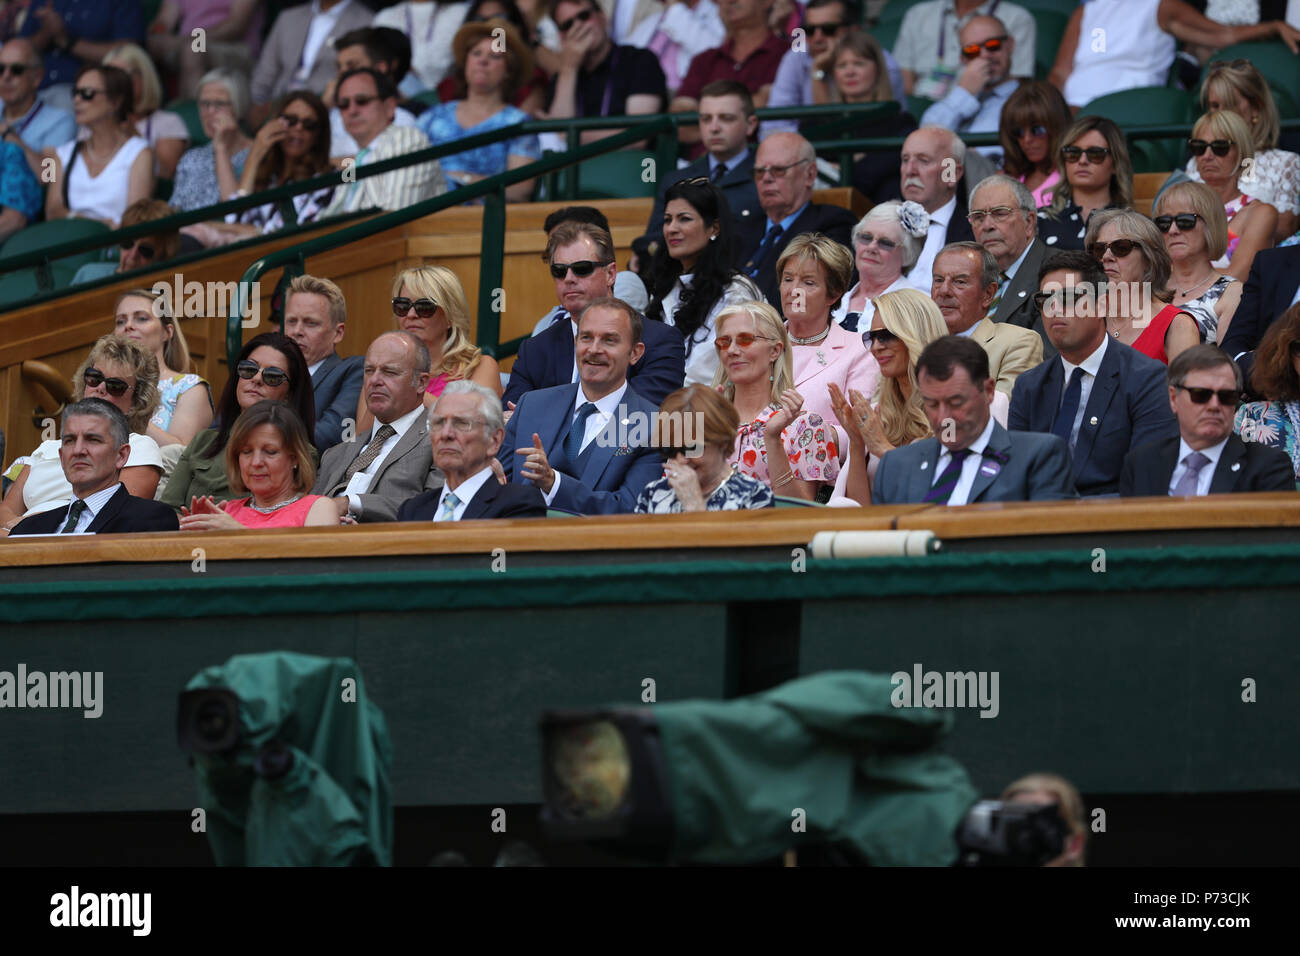 LONDON, ENGLAND - JULY 03: Carlo Nero and Joely Richardson, Vernon Kay and Tess Daly sit in the Royal Box as they attend day two of the Wimbledon Tennis Championships at the All England Lawn Tennis and Croquet Club on July 3, 2018 in London, England.  People:  Carlo Nero and Joely Richardson, Vernon Kay and Tess Daly Credit: Storms Media Group/Alamy Live News Stock Photo